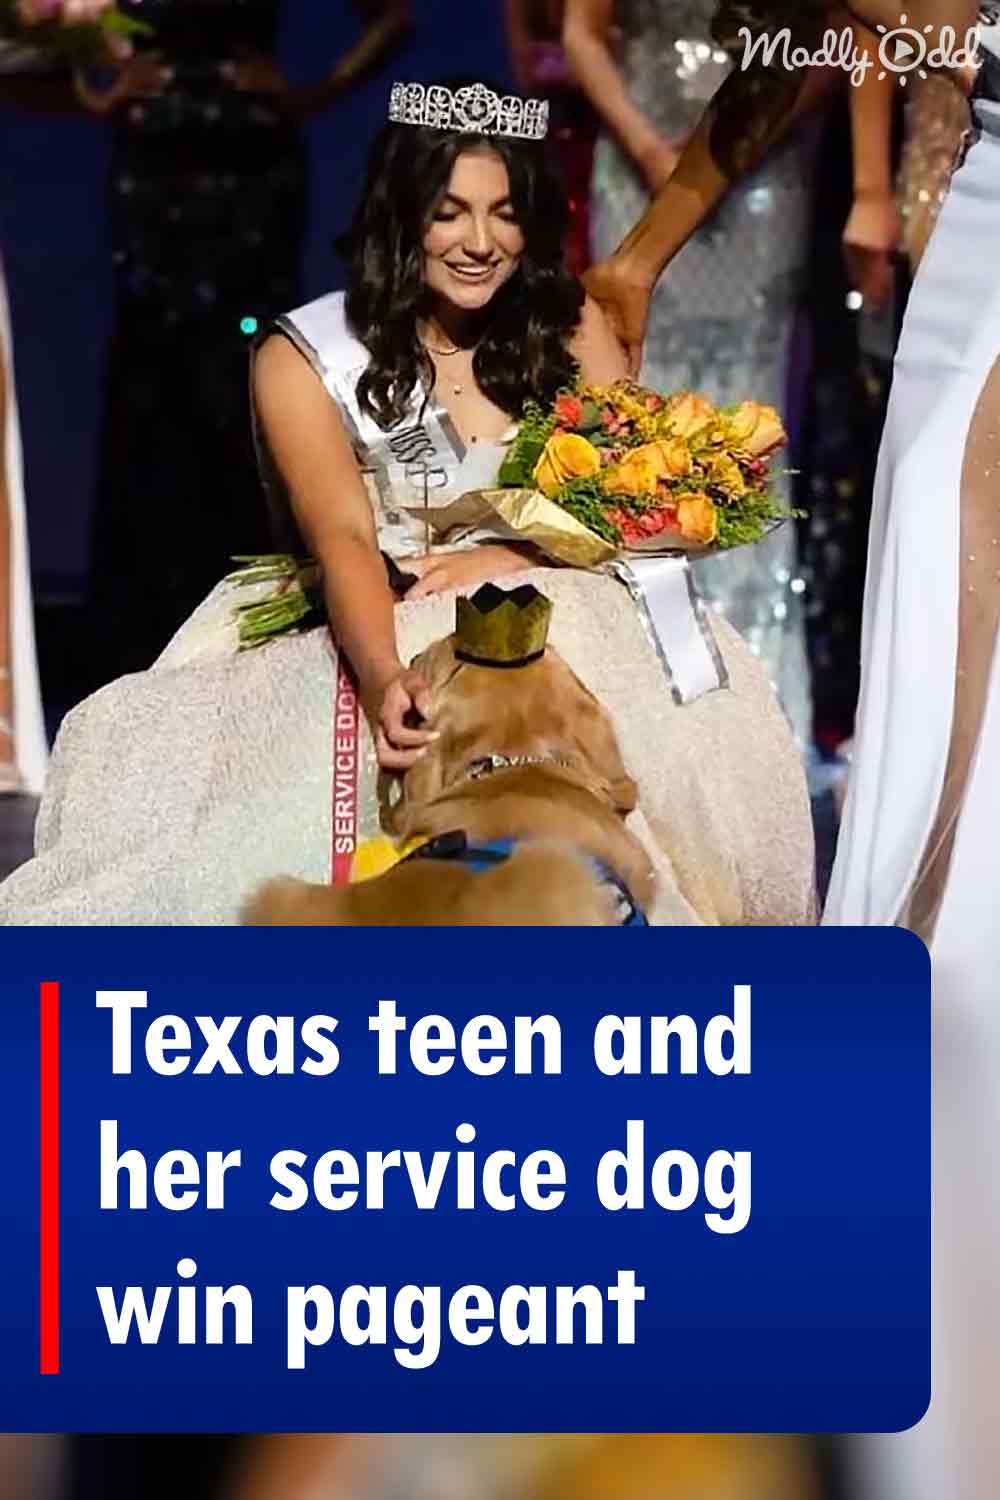 Texas teen and her service dog win pageant